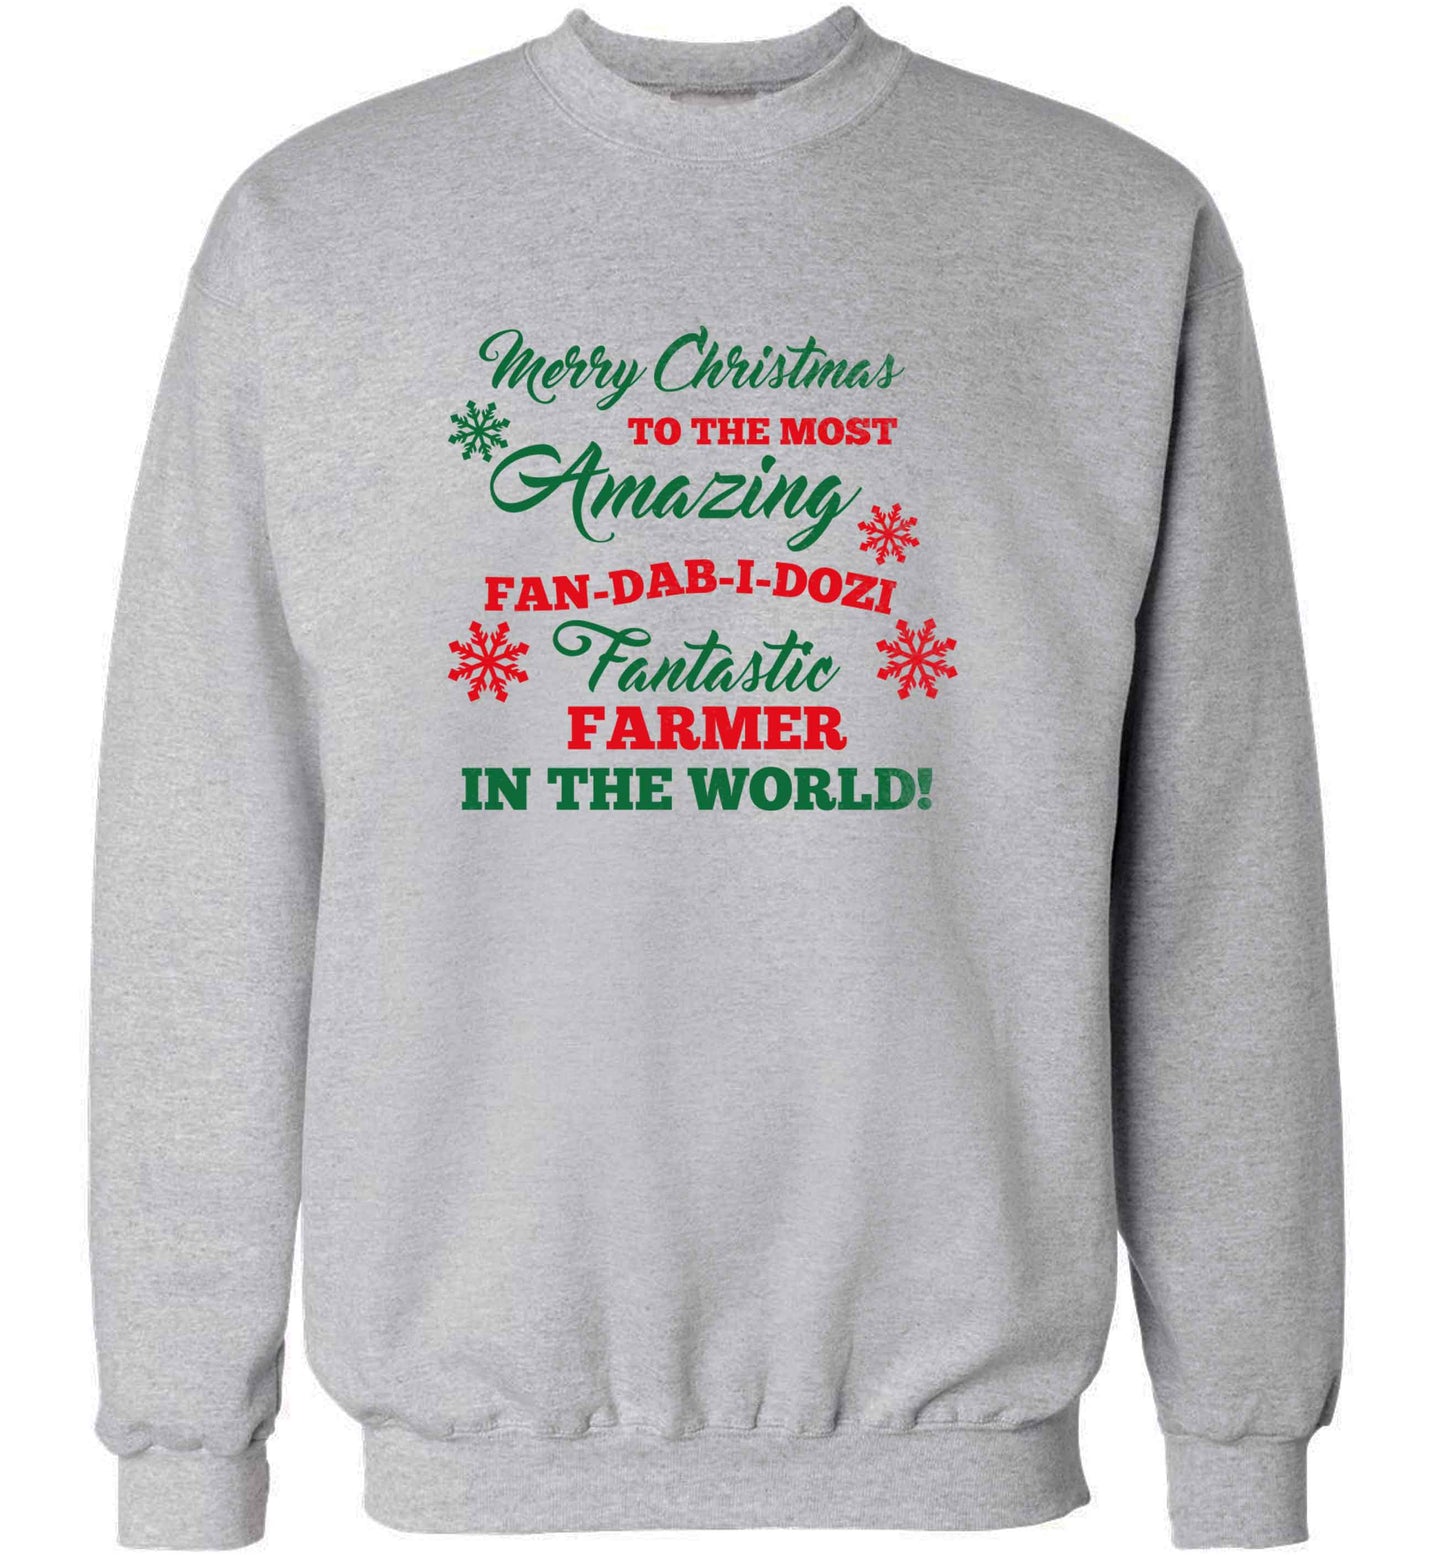 Merry Christmas to the most amazing farmer in the world! adult's unisex grey sweater 2XL